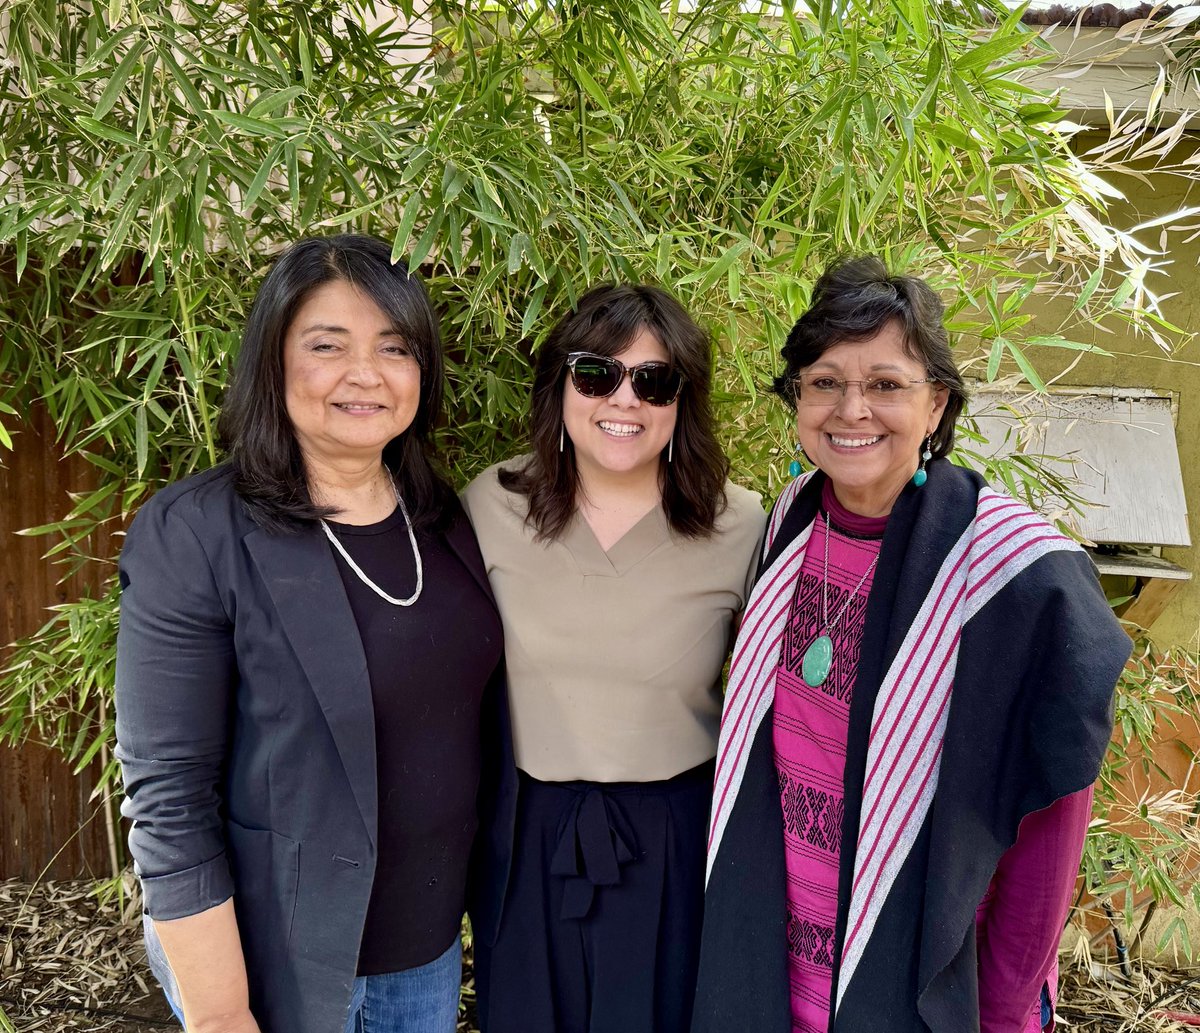 Honored 2 have had breakfast w my dear friends & colleagues, Dr. Diane Torres-Velasquez who is running for New Mexico State Rep. Dist-18 & Marianna Anaya who is running for Dist-30 that includes ⁦@UNM⁩ If you live in any of these districts, you couldn’t hop 4 better reps.